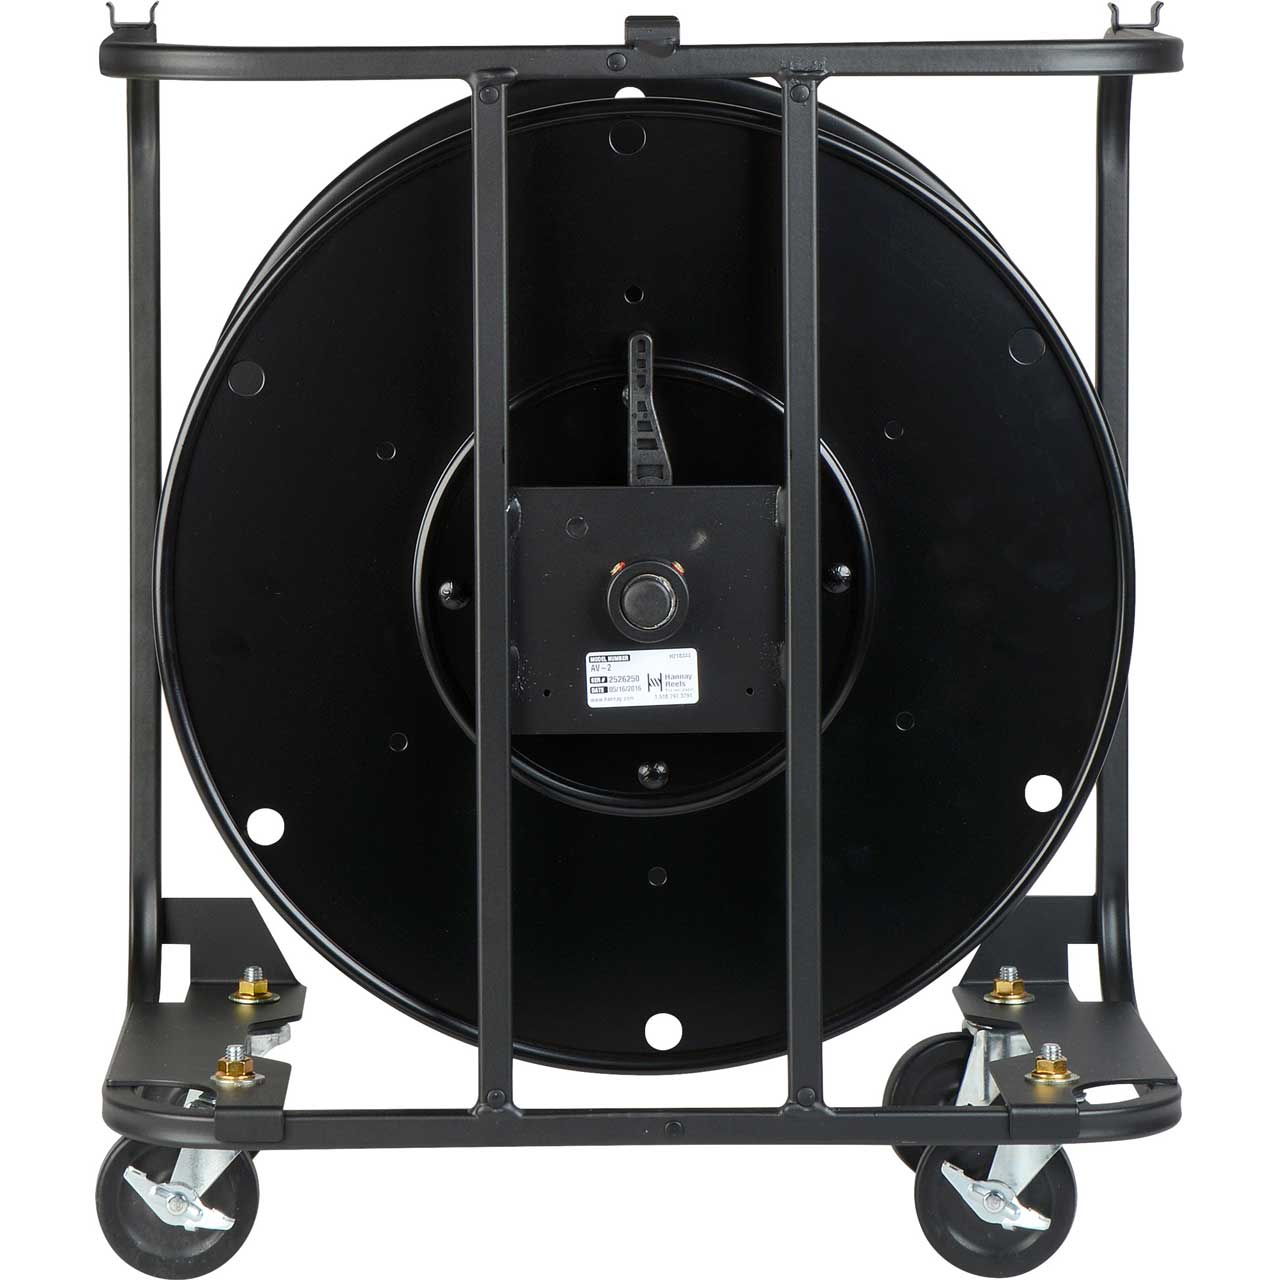 Hannay Reels AVF-18 Fiber Optic Series Metal Cable Reel for up to 1000 Feet  of SMPTE Cable - with Casters